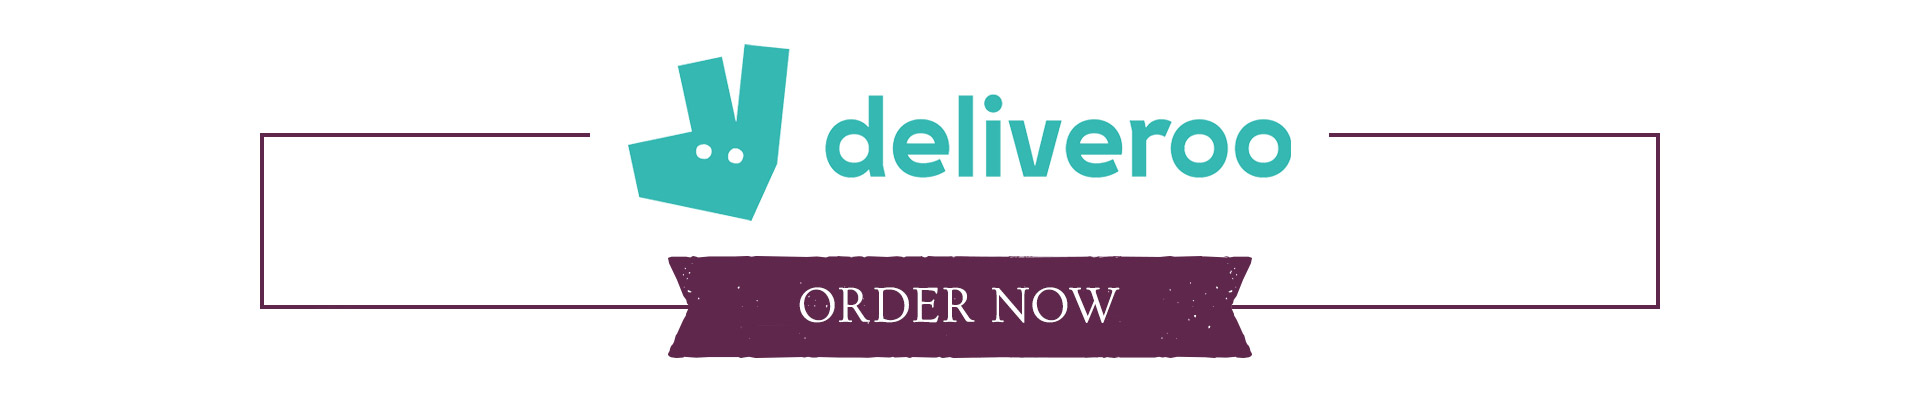 core-deliveroo-deliveroo-thin-banner.jpg